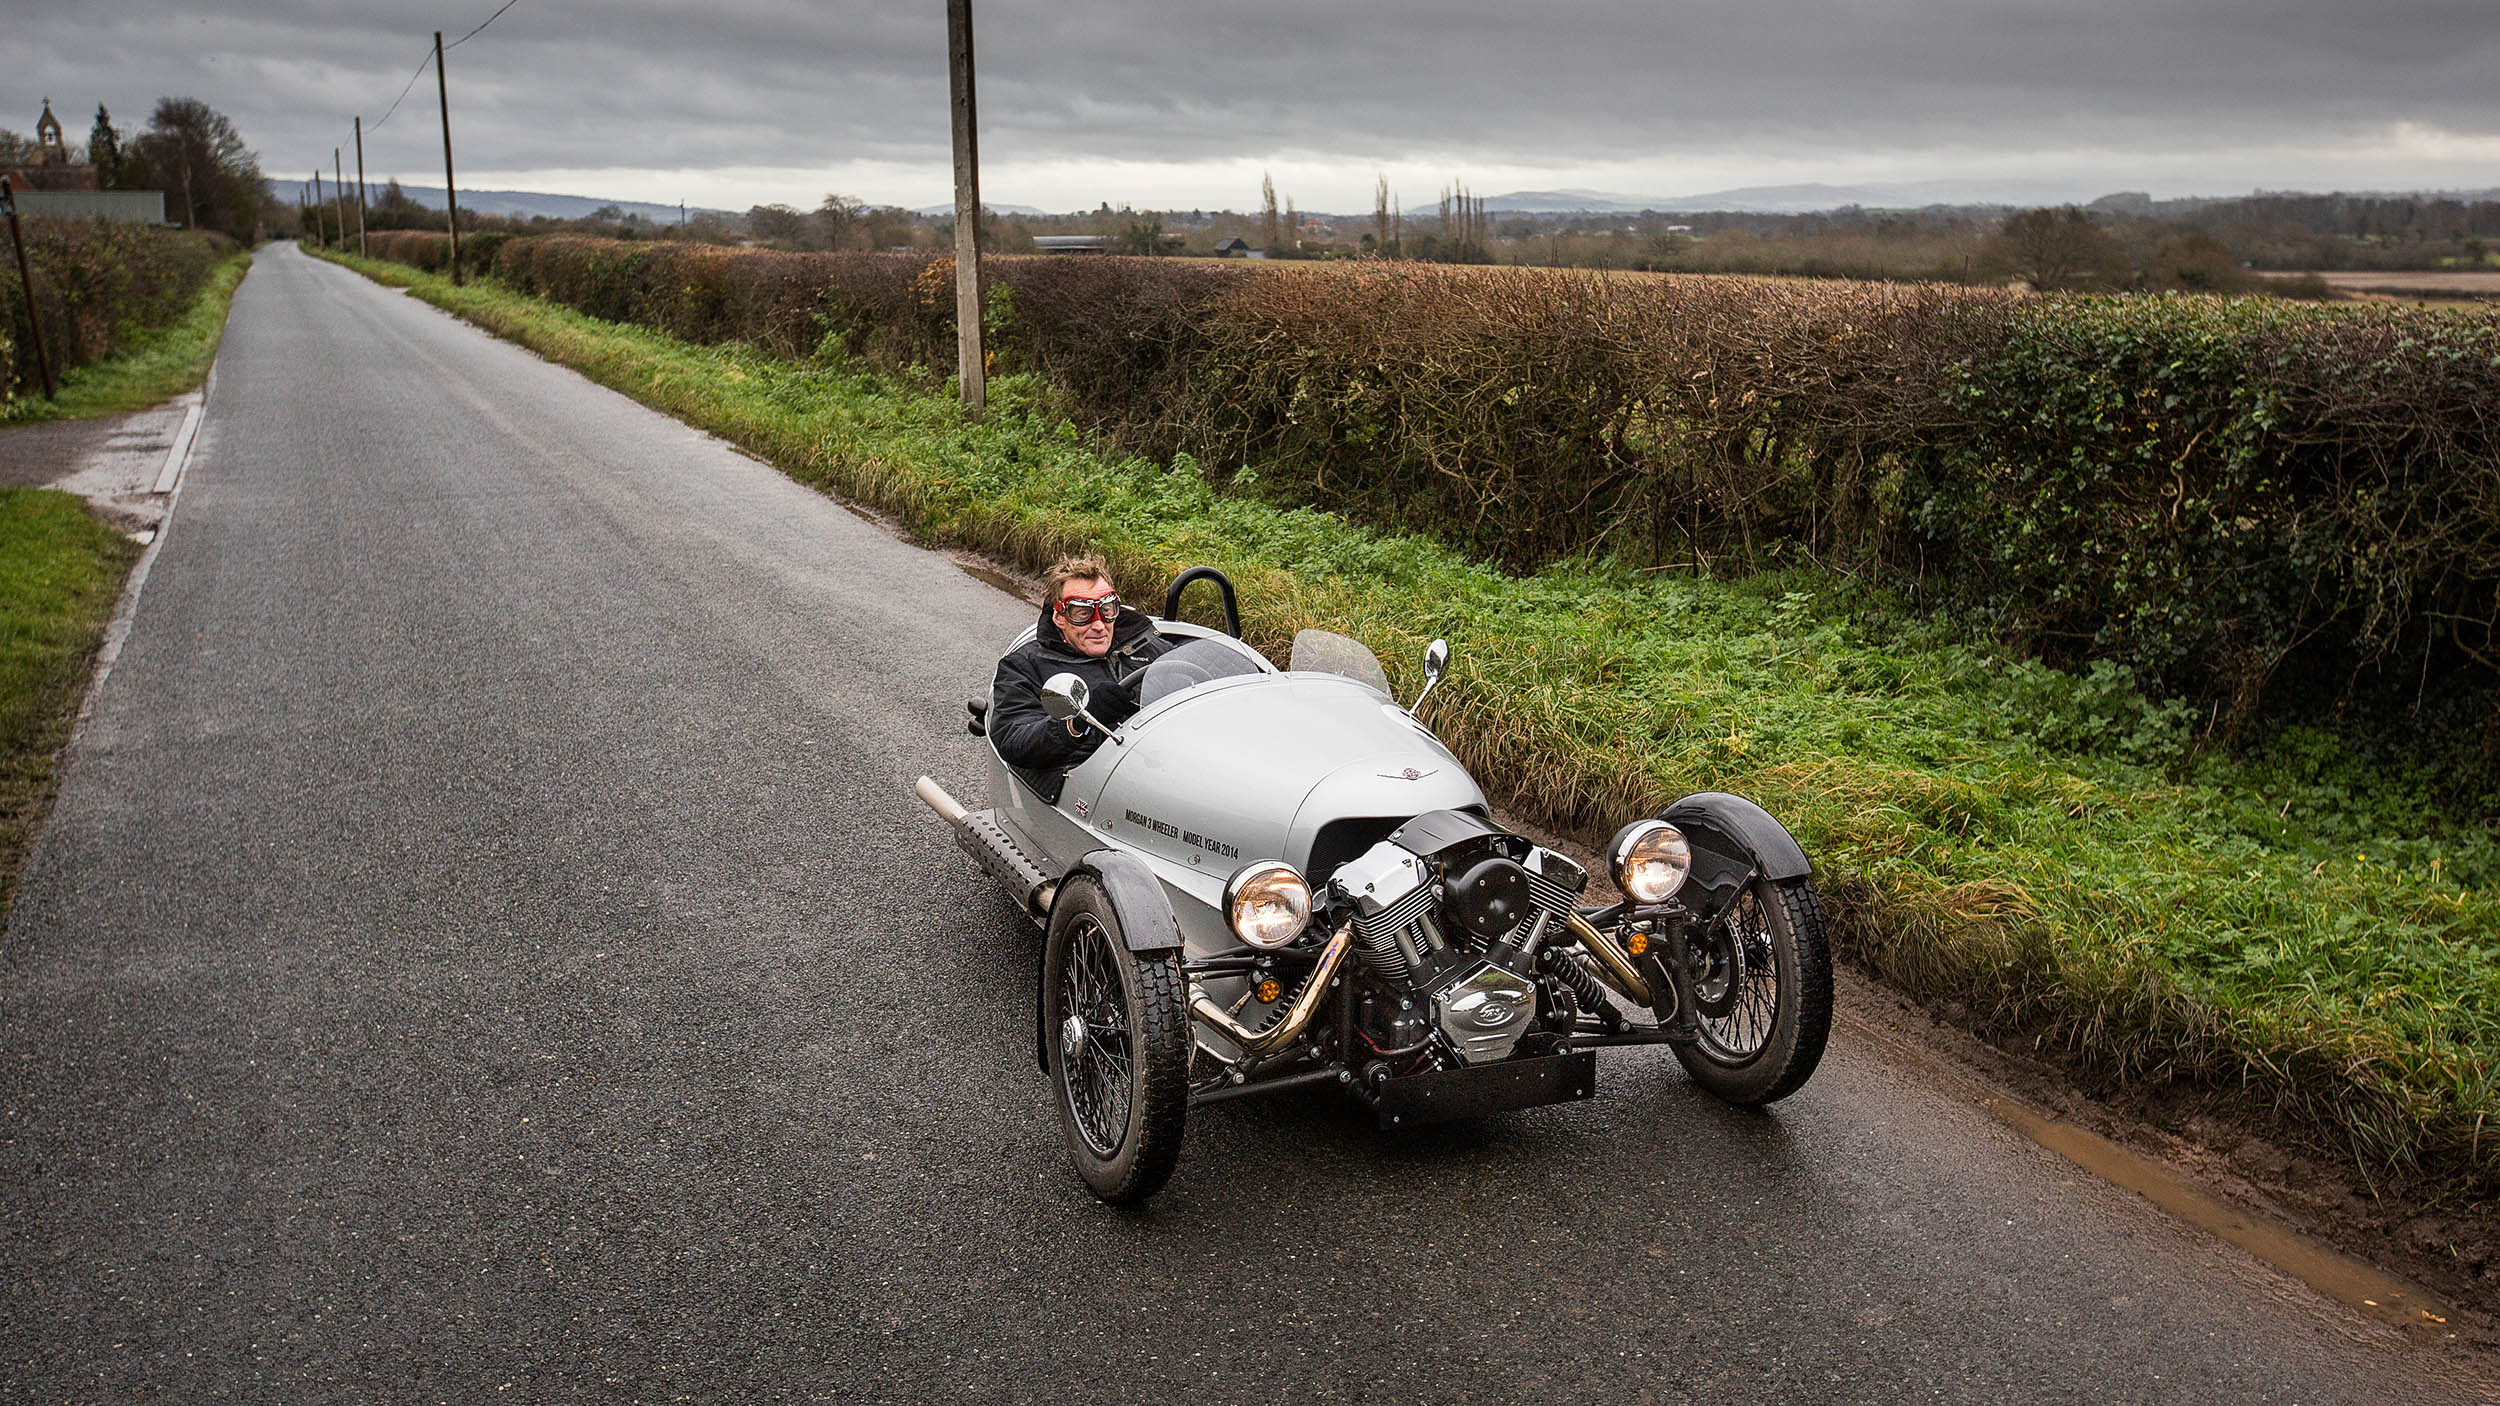  A Morgan 3 Wheeler in the company's home town of Malvern, Worcestershire 